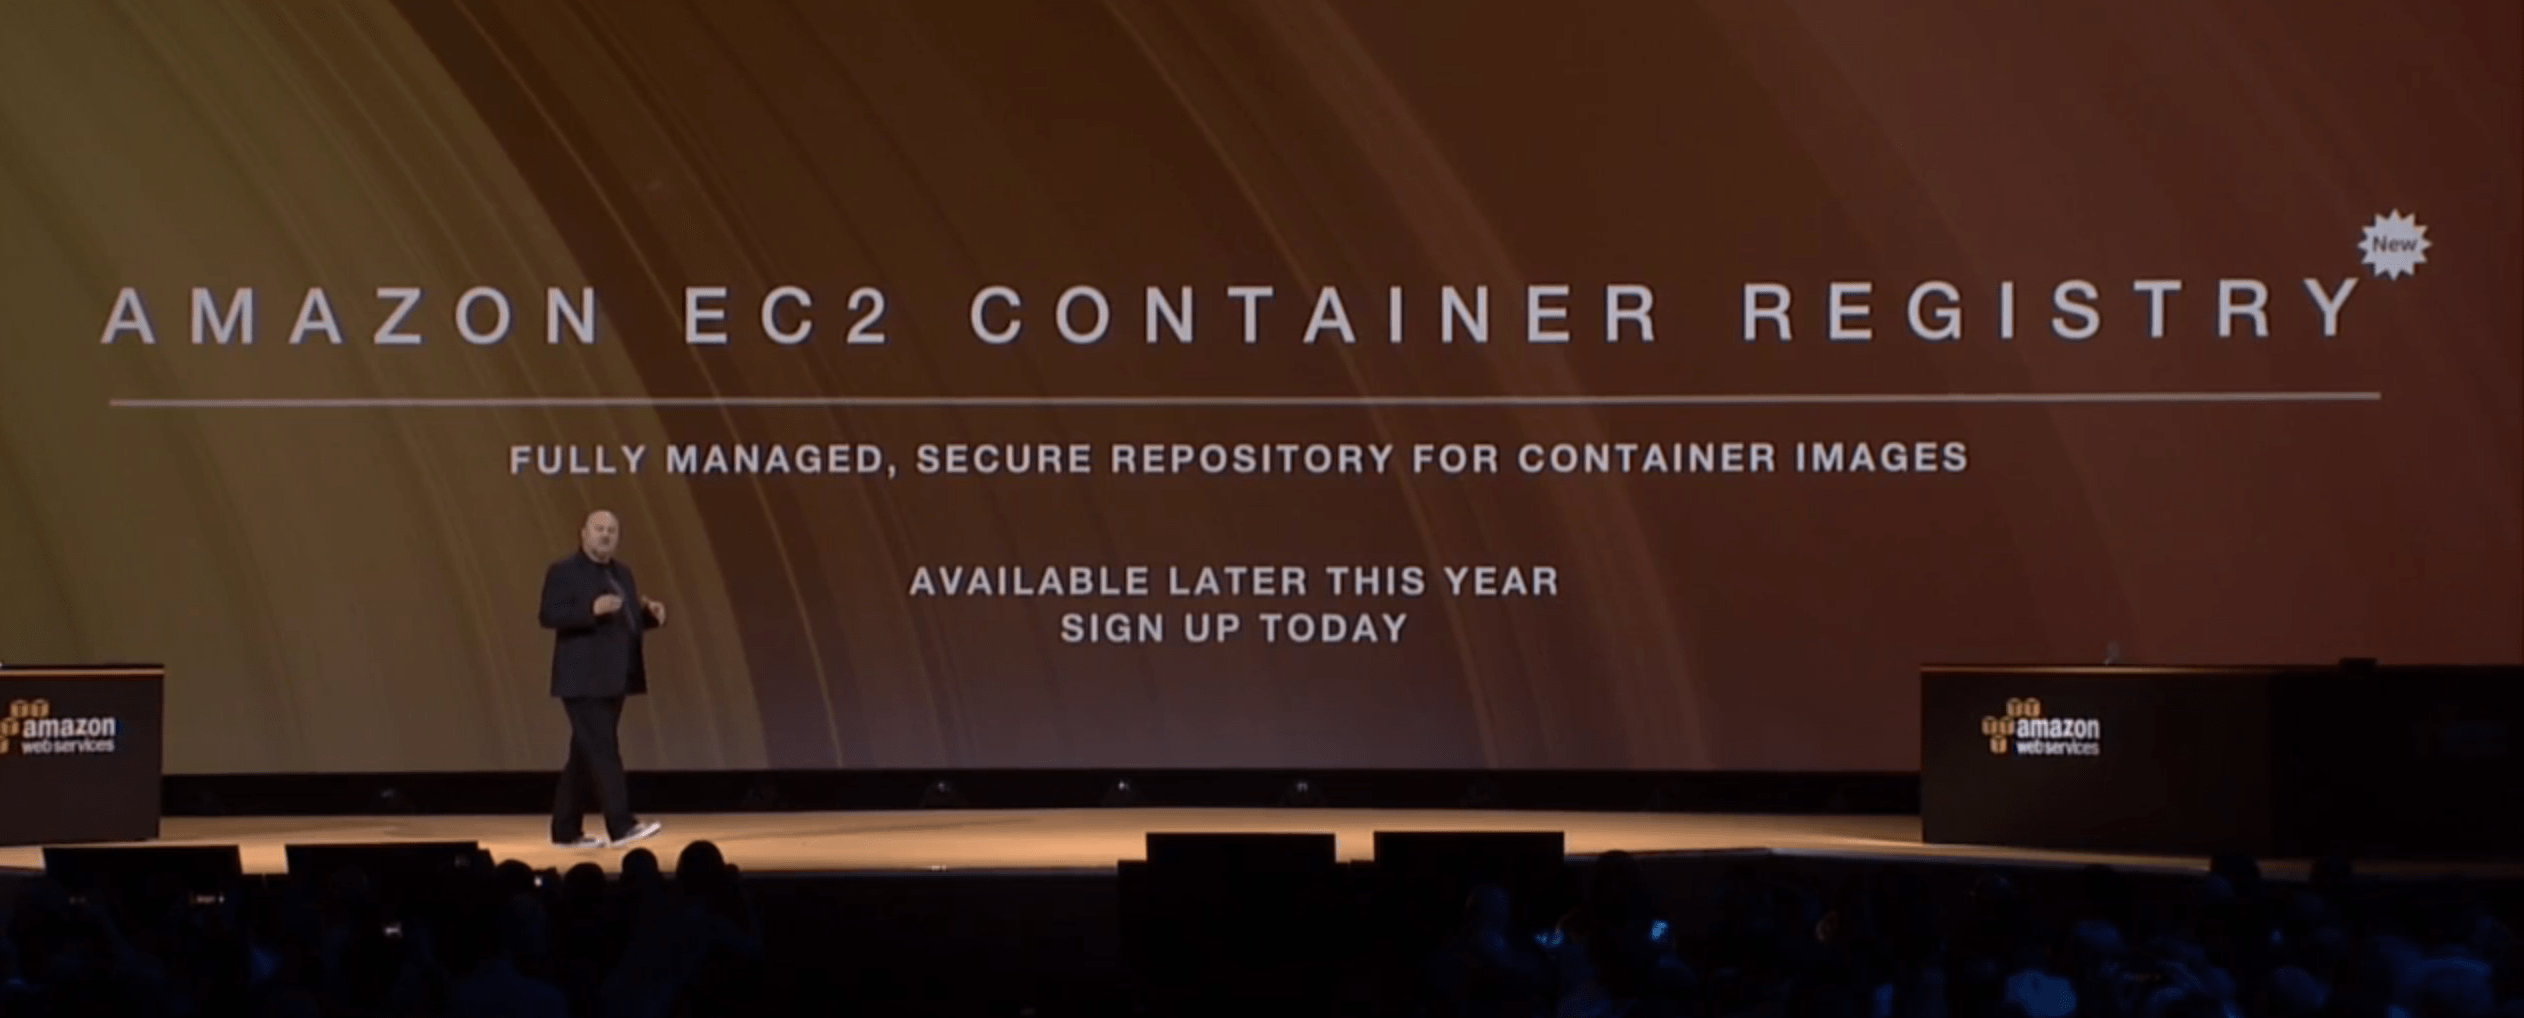 Amazon chief technology officer Werner Vogels announces the EC2 Container Registry at the AWS re:Invent conference in Las Vegas on Oct. 8.